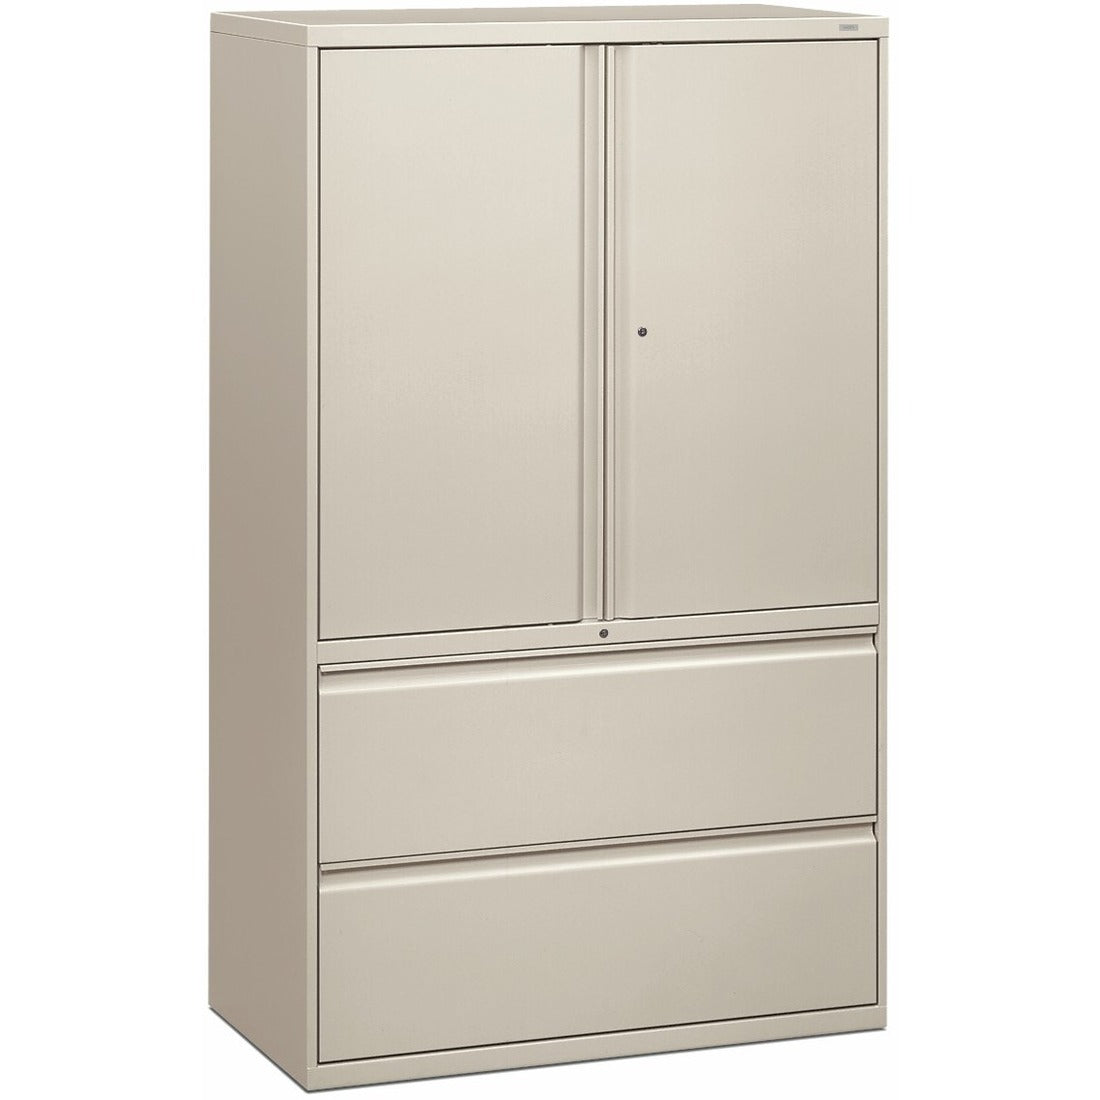 HON Brigade 800 H895LS Lateral File - 42" x 18"67" - 2 Drawer(s) - 3 Shelve(s) - Finish: Light Gray - 